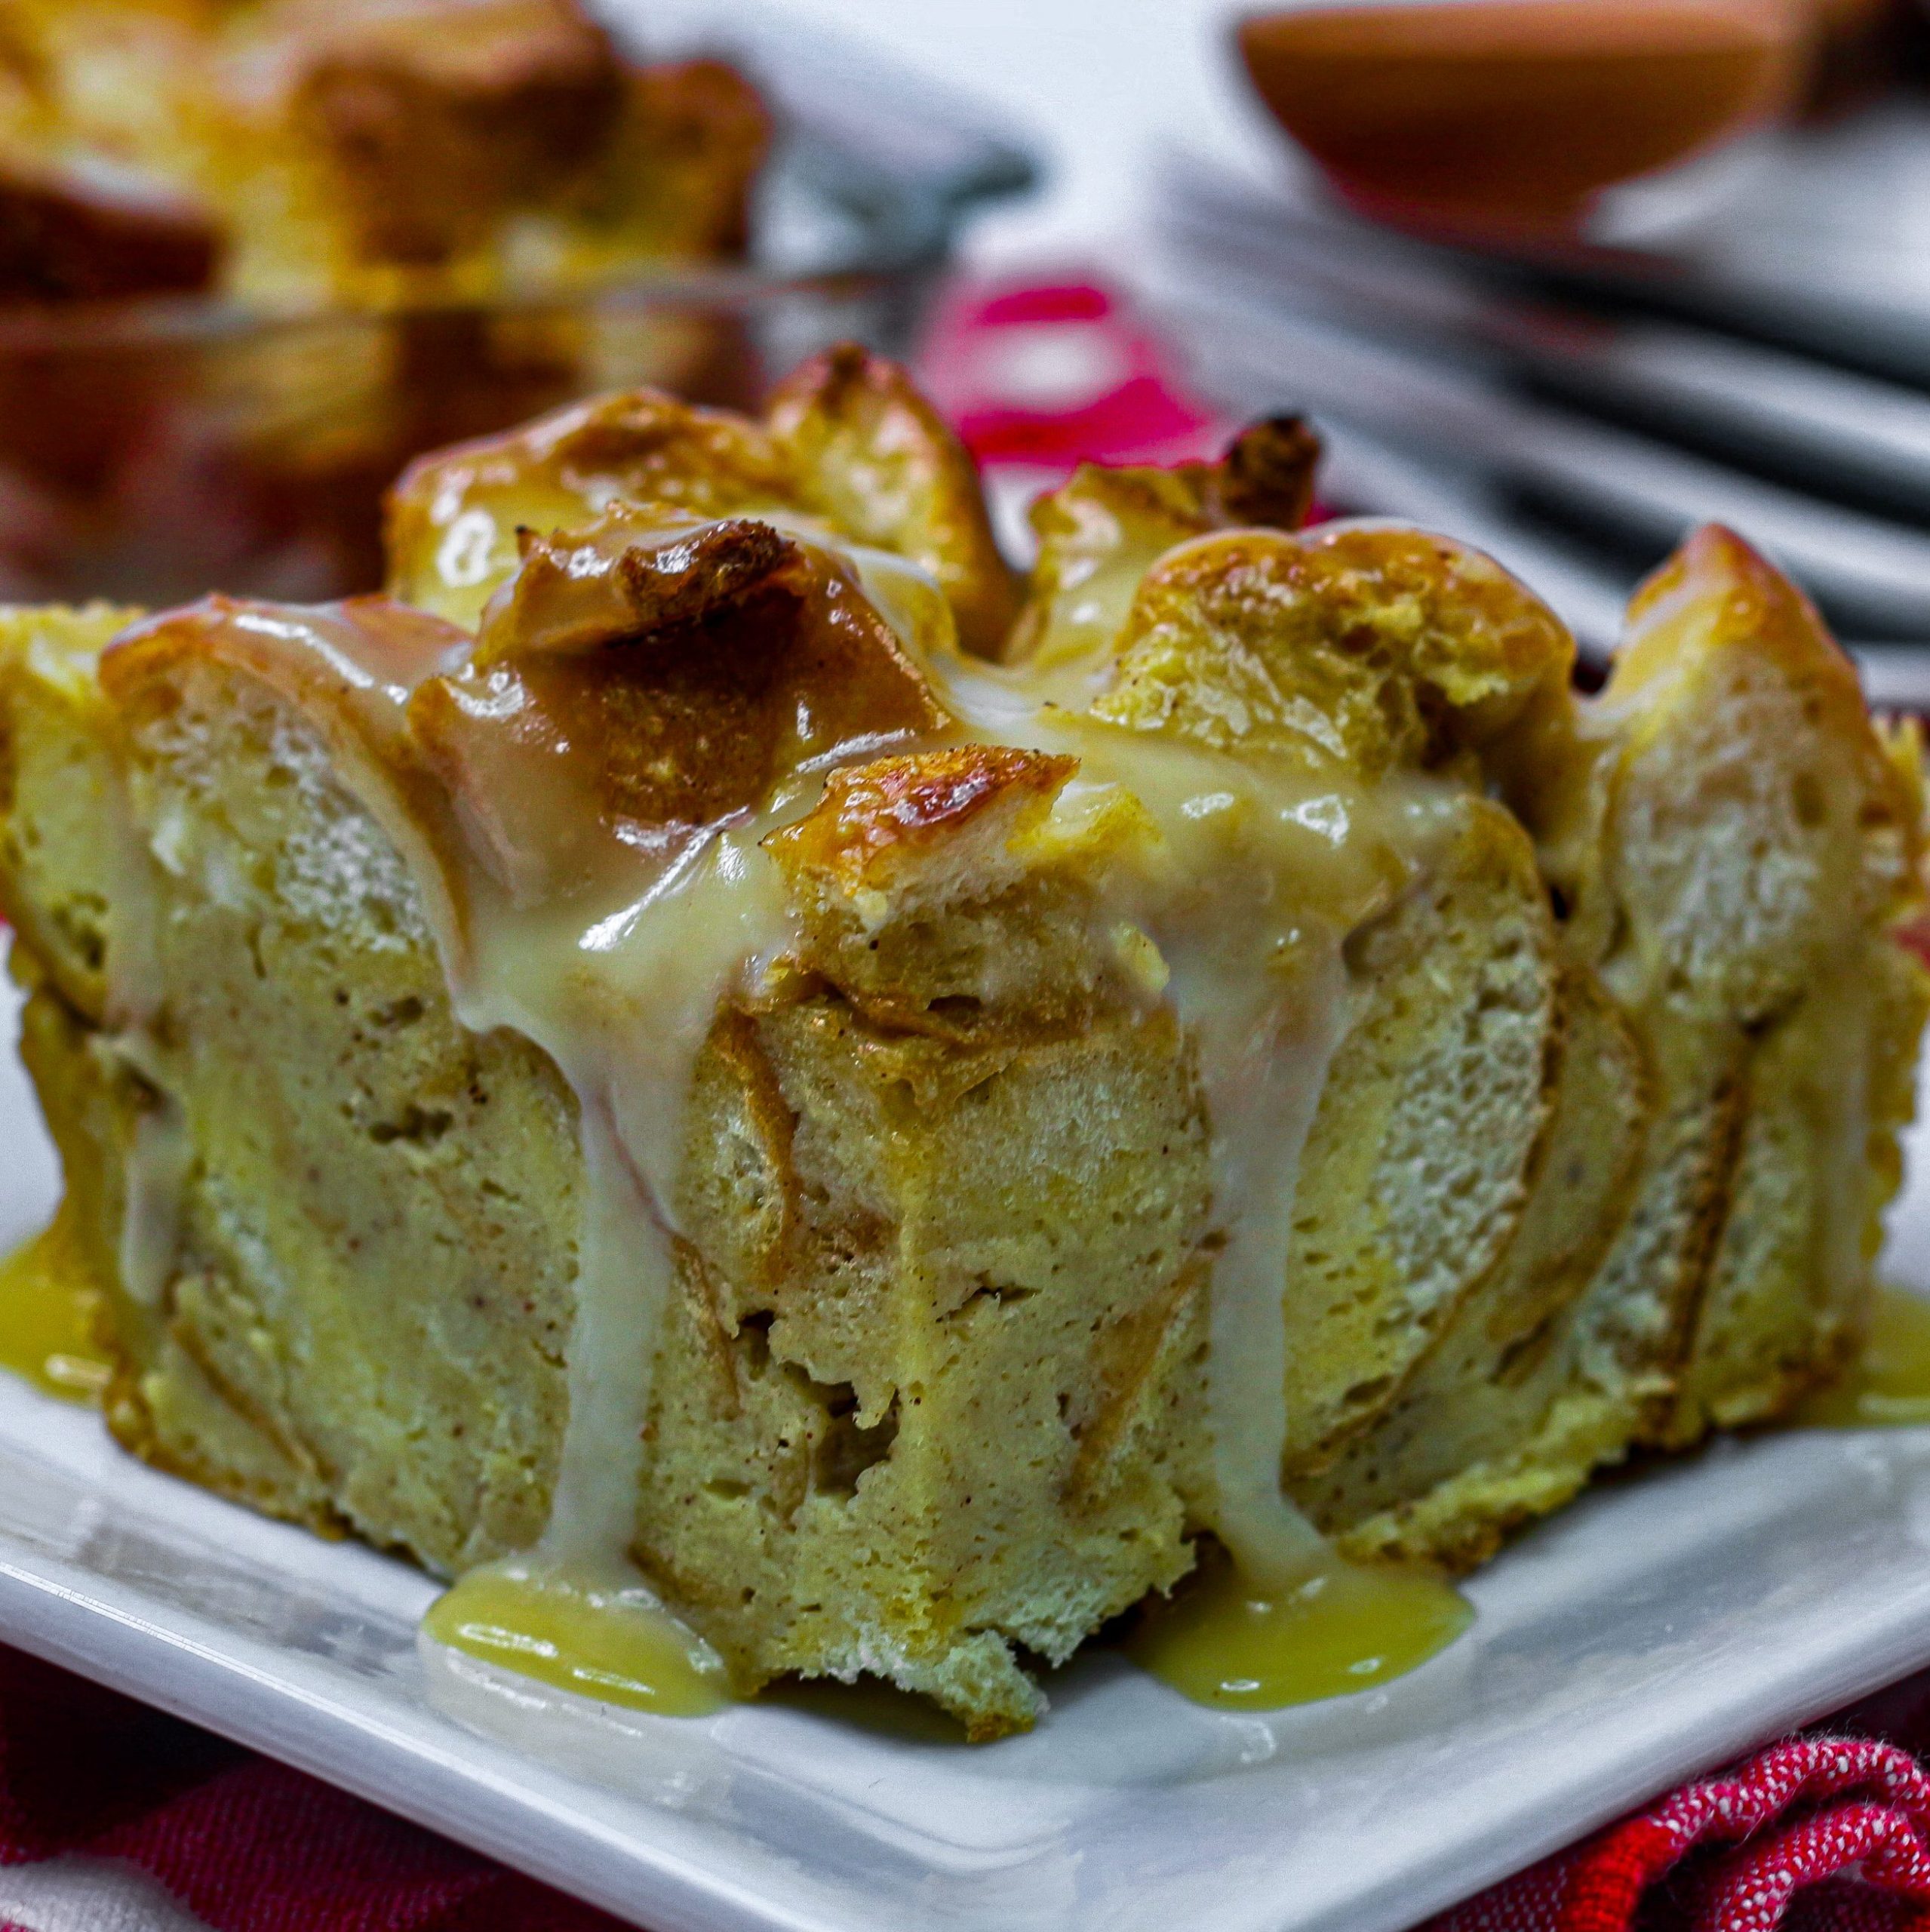 bread pudding with heavy cream, new orleans bread pudding, best bread pudding recipe